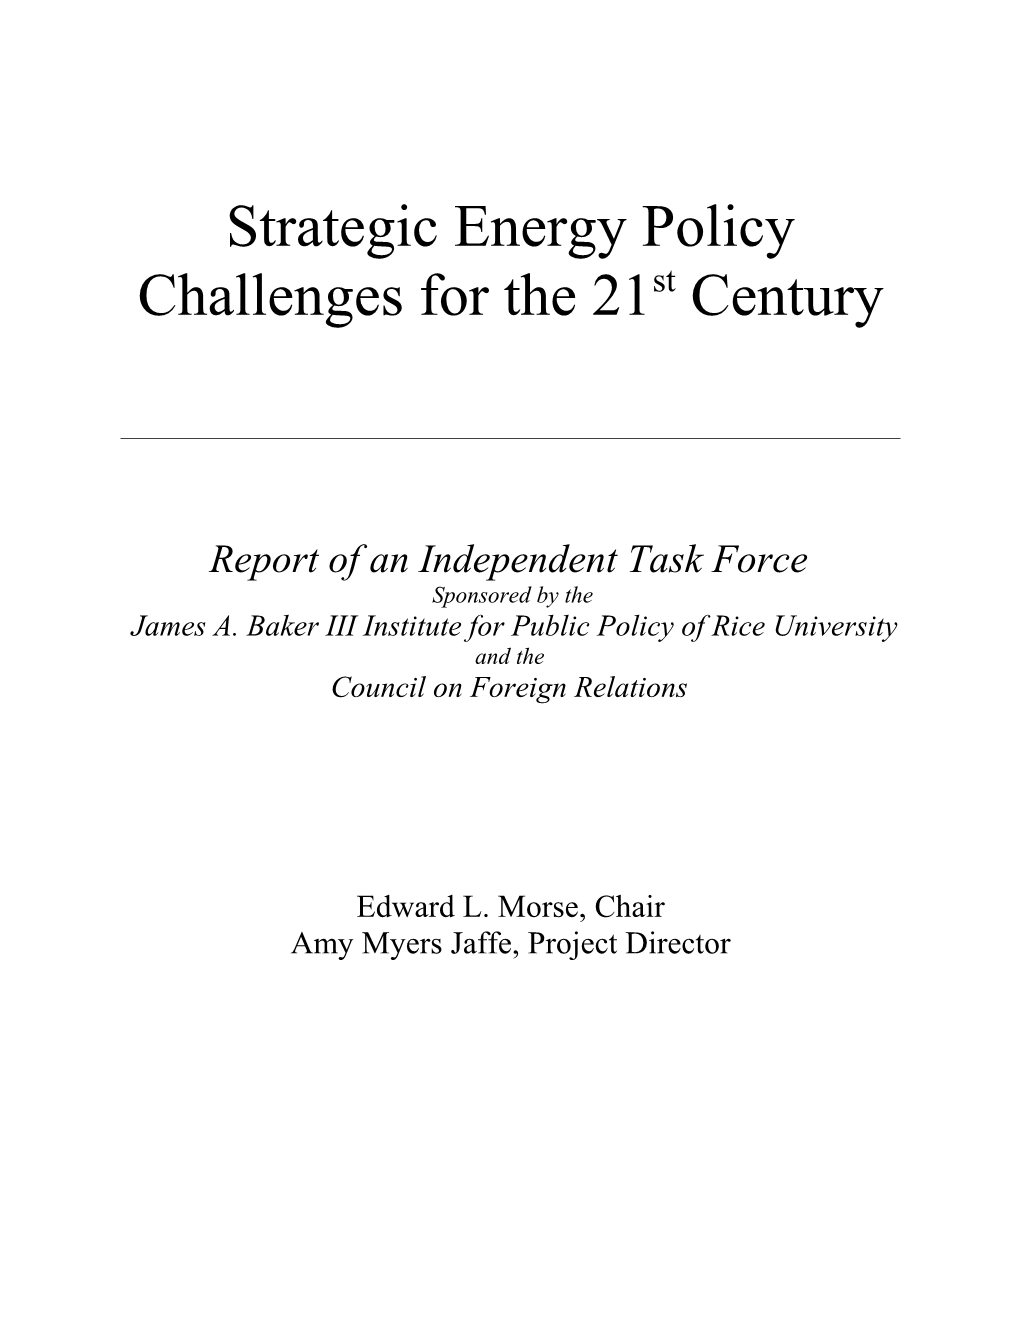 Strategic Energy Policy Challenges for the 21St Century